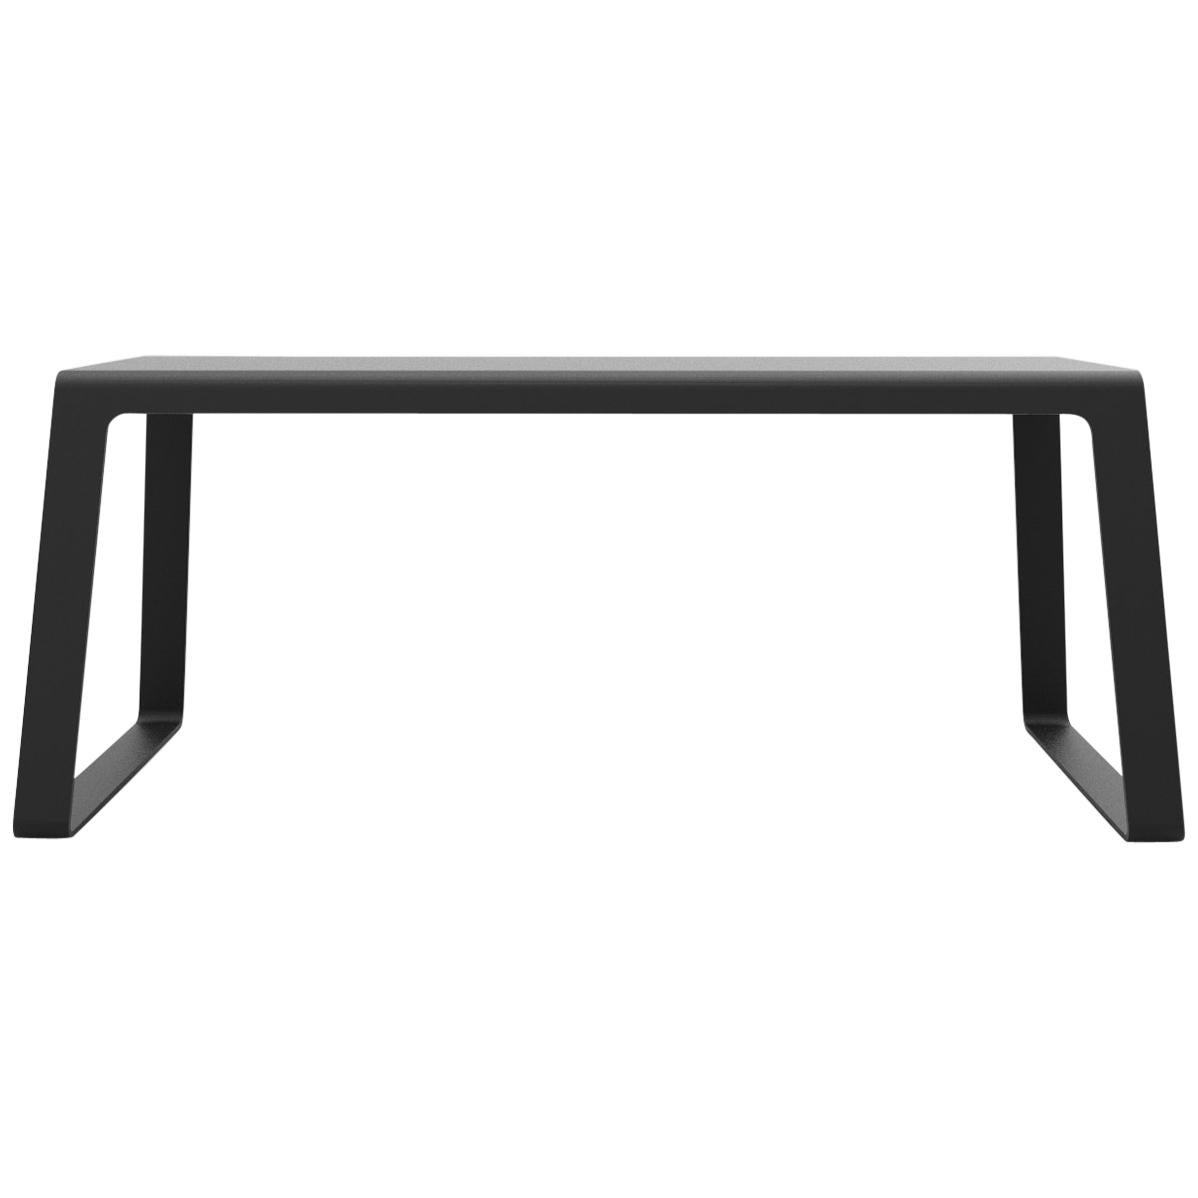 Bench in Powder Coated Steel Plate by Jonathan Nesci